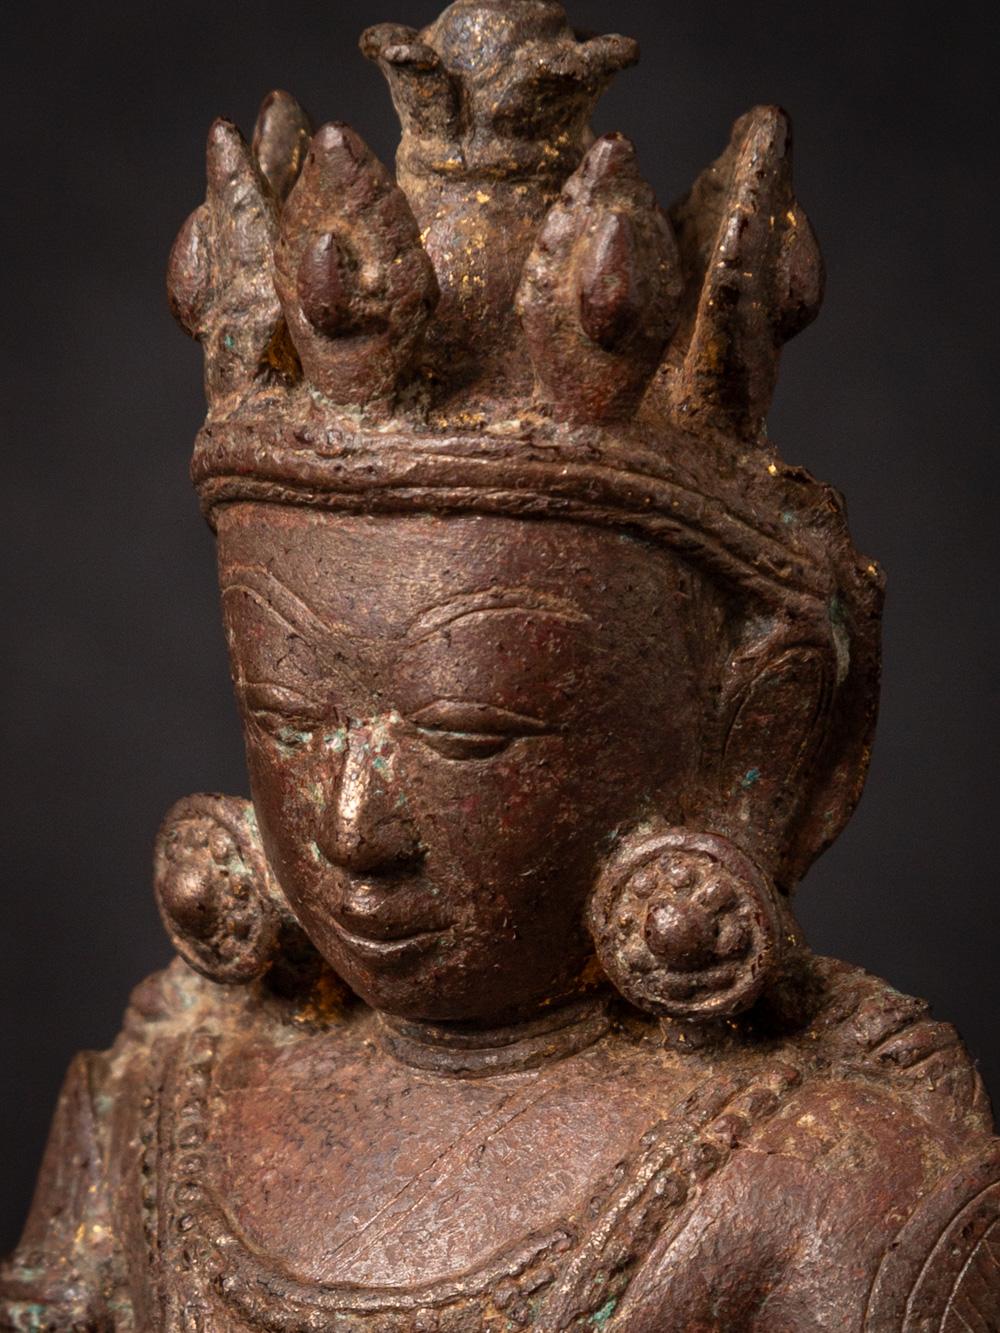 14-15th century Special Antique Bronze Arakan Buddha Statue from Burma For Sale 2